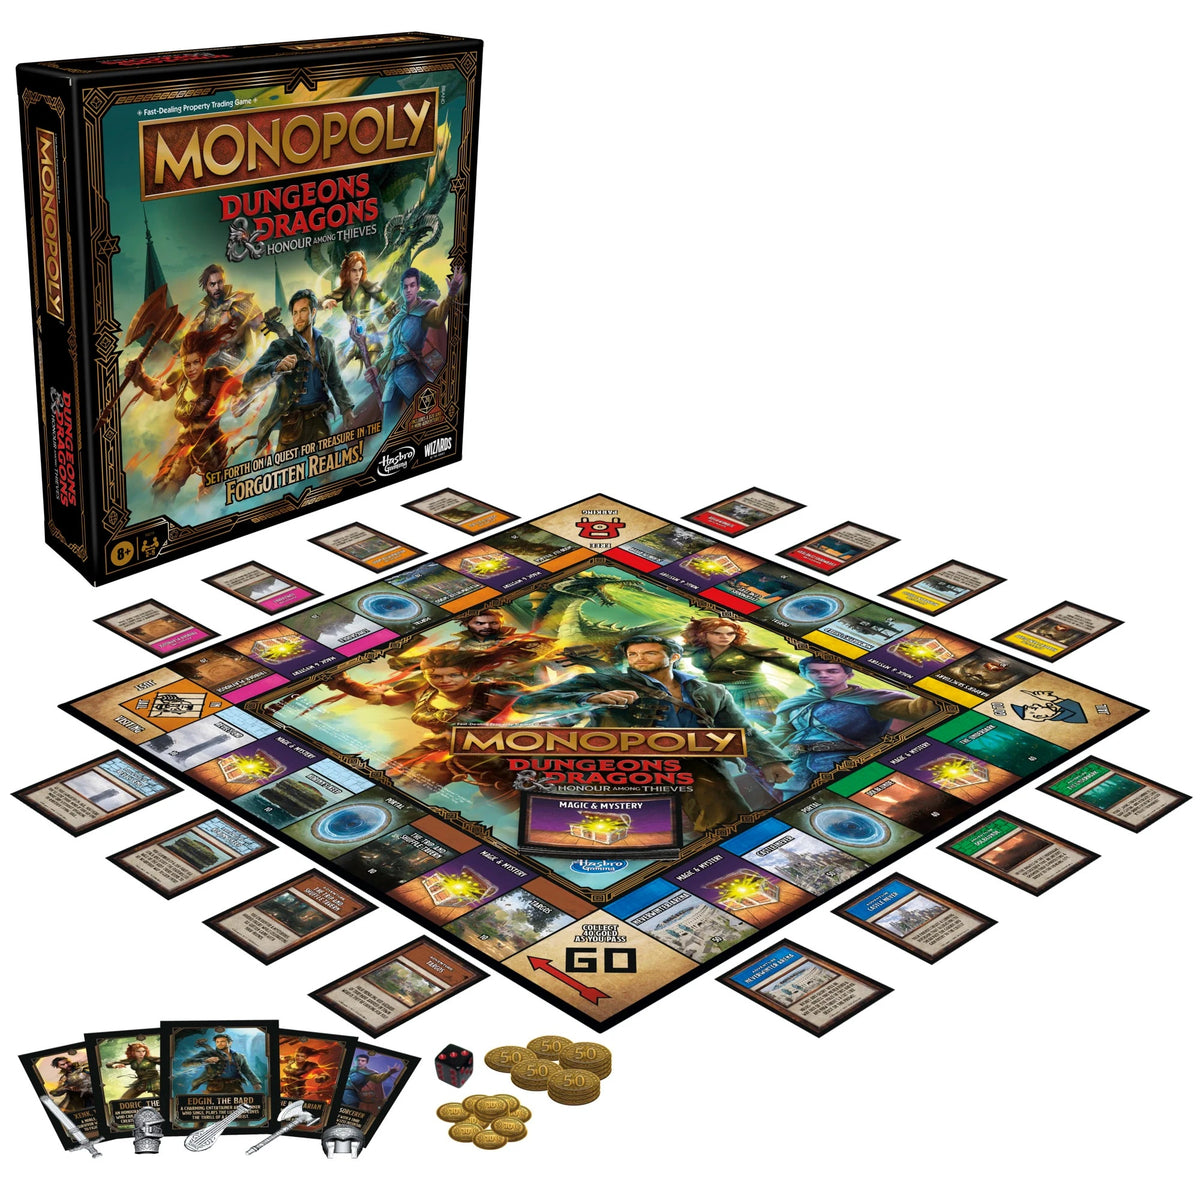 Monopoly: Dungeons and Dragons Honor Among Thieves